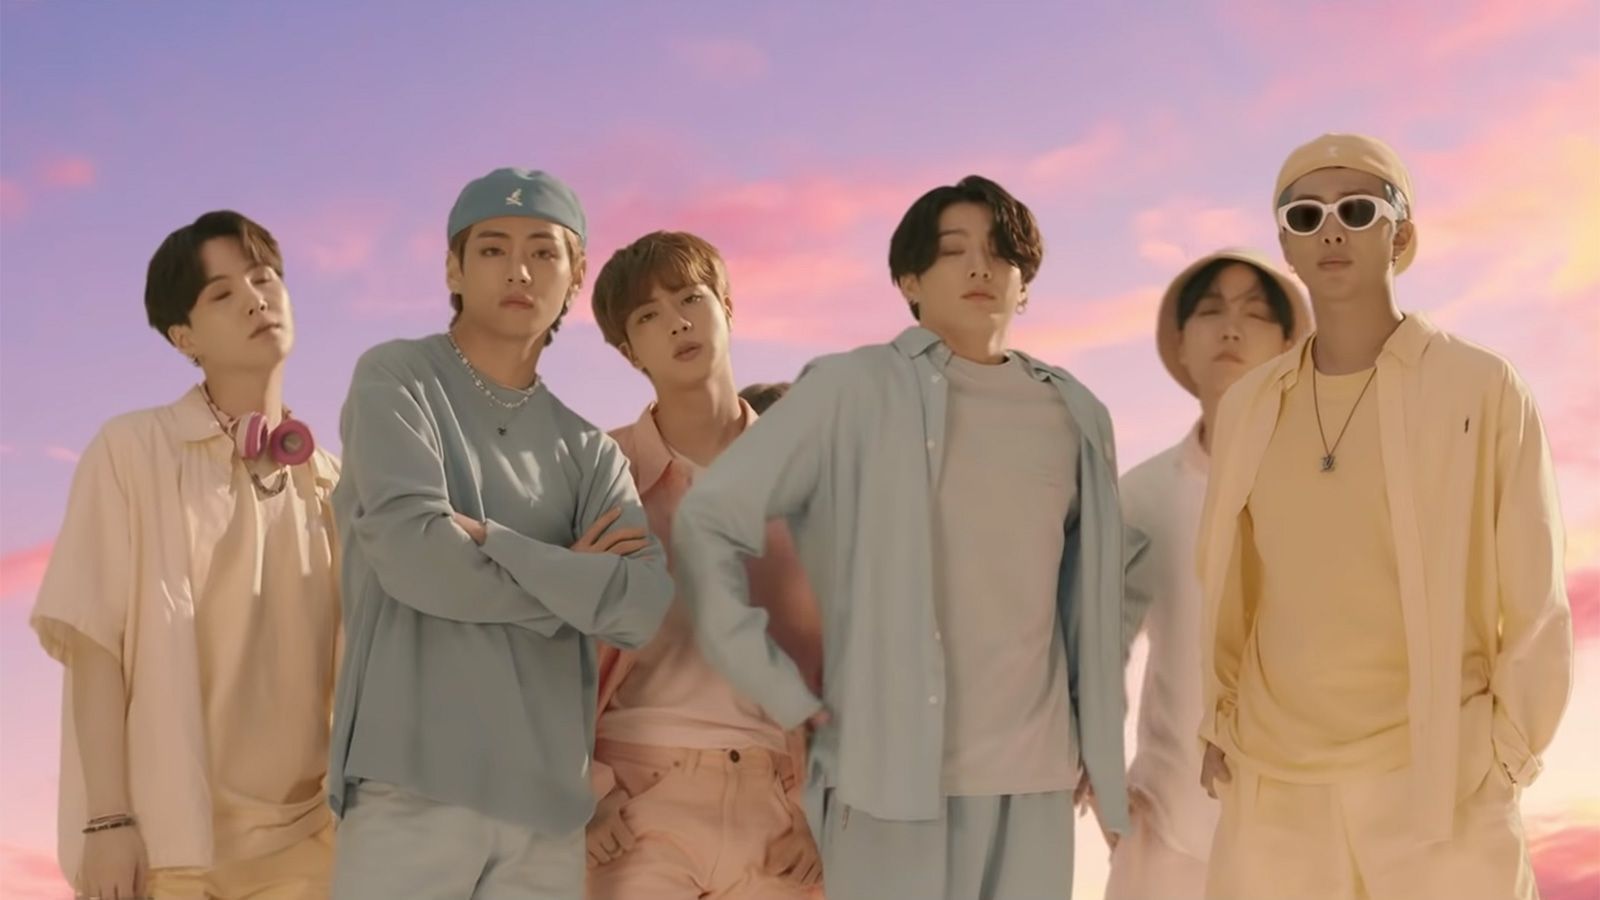 BTS is the first band to rack up 100 million YouTube views in 24 hours